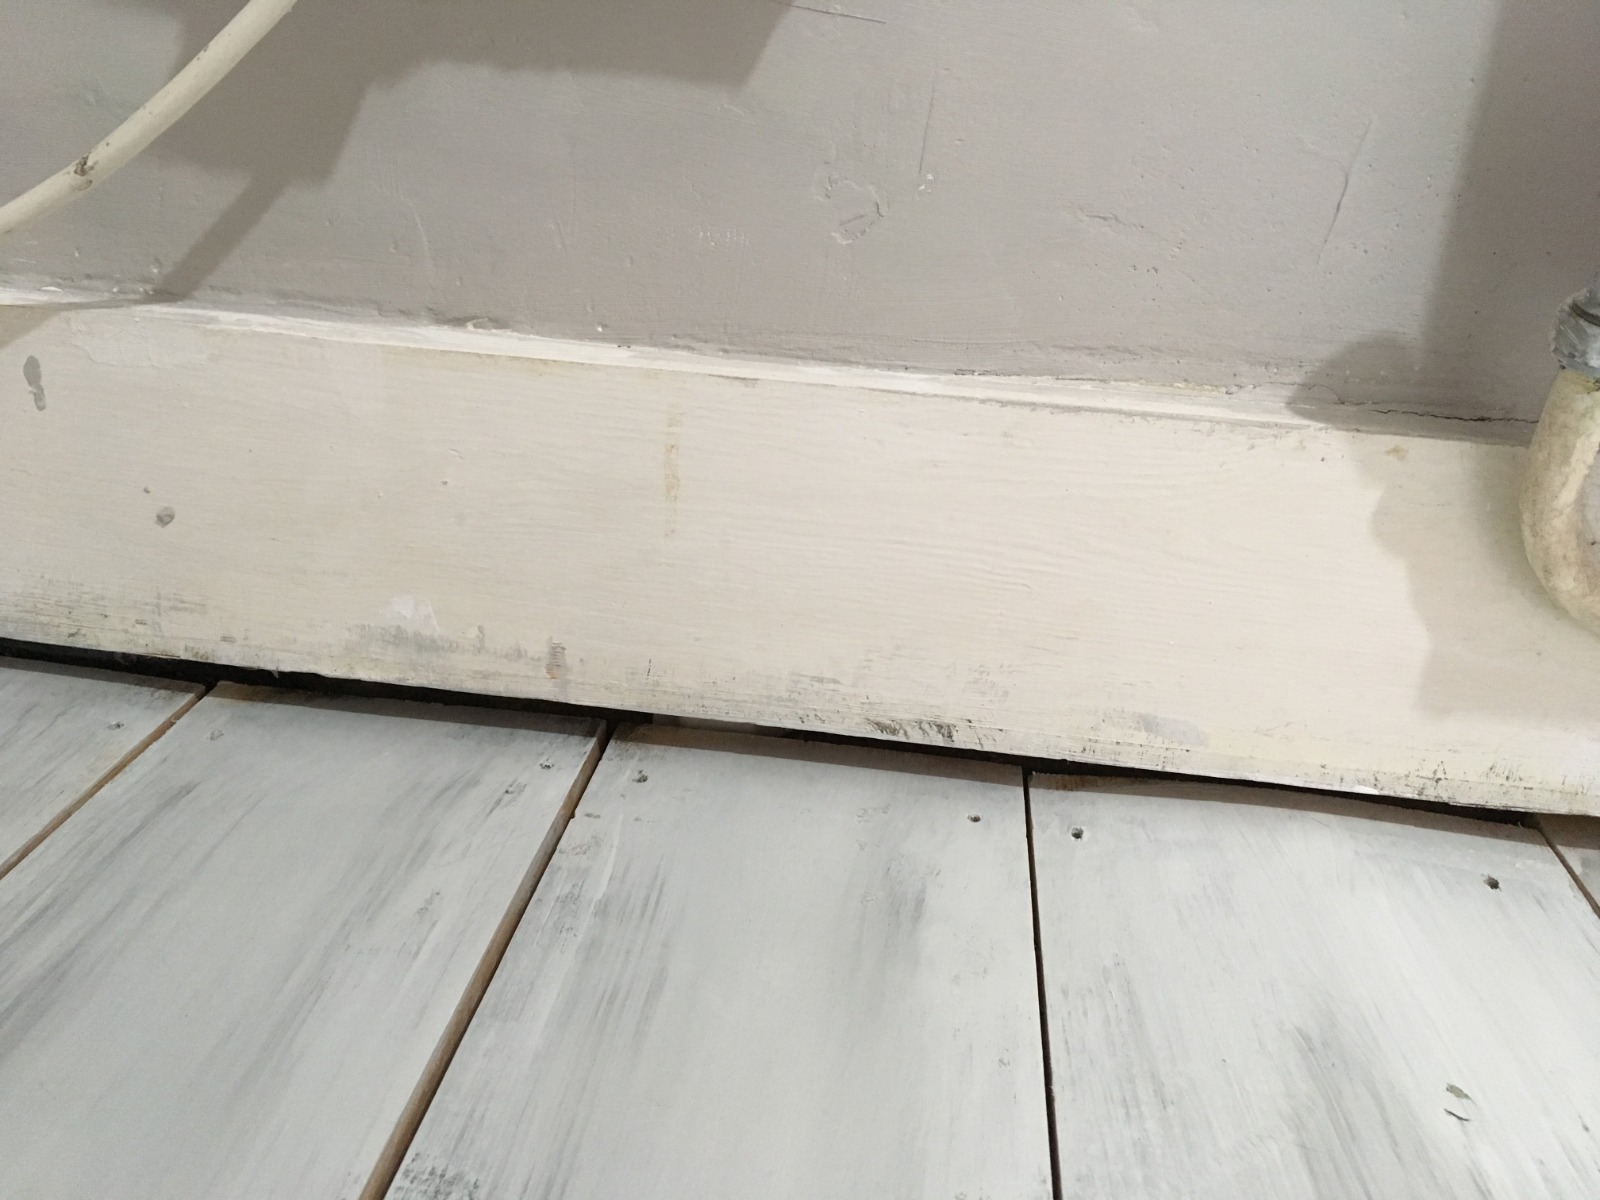 Skirting Boards How To Improve Without Replacing Part 2